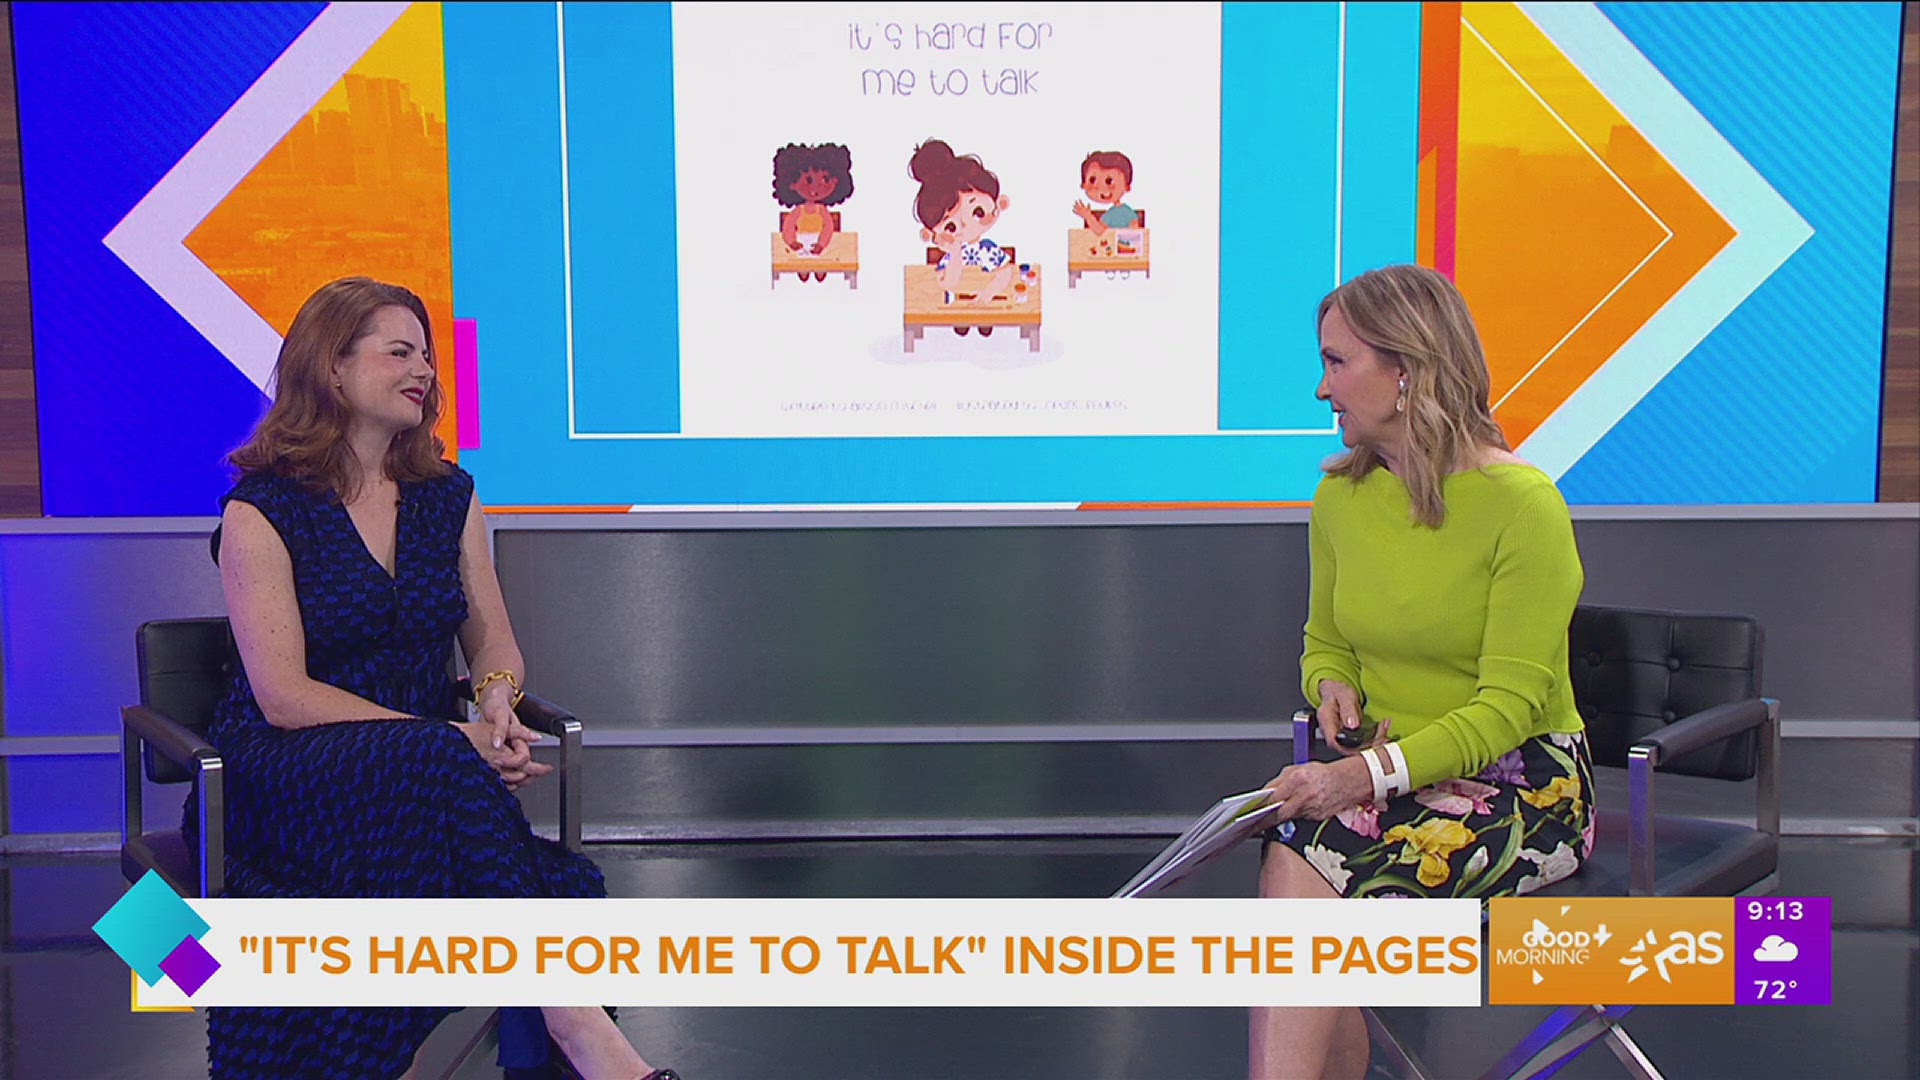 Allison Mitchell of Dallas takes us into the pages of her new book inspired by her children who are both on the autism spectrum and speech-delayed.